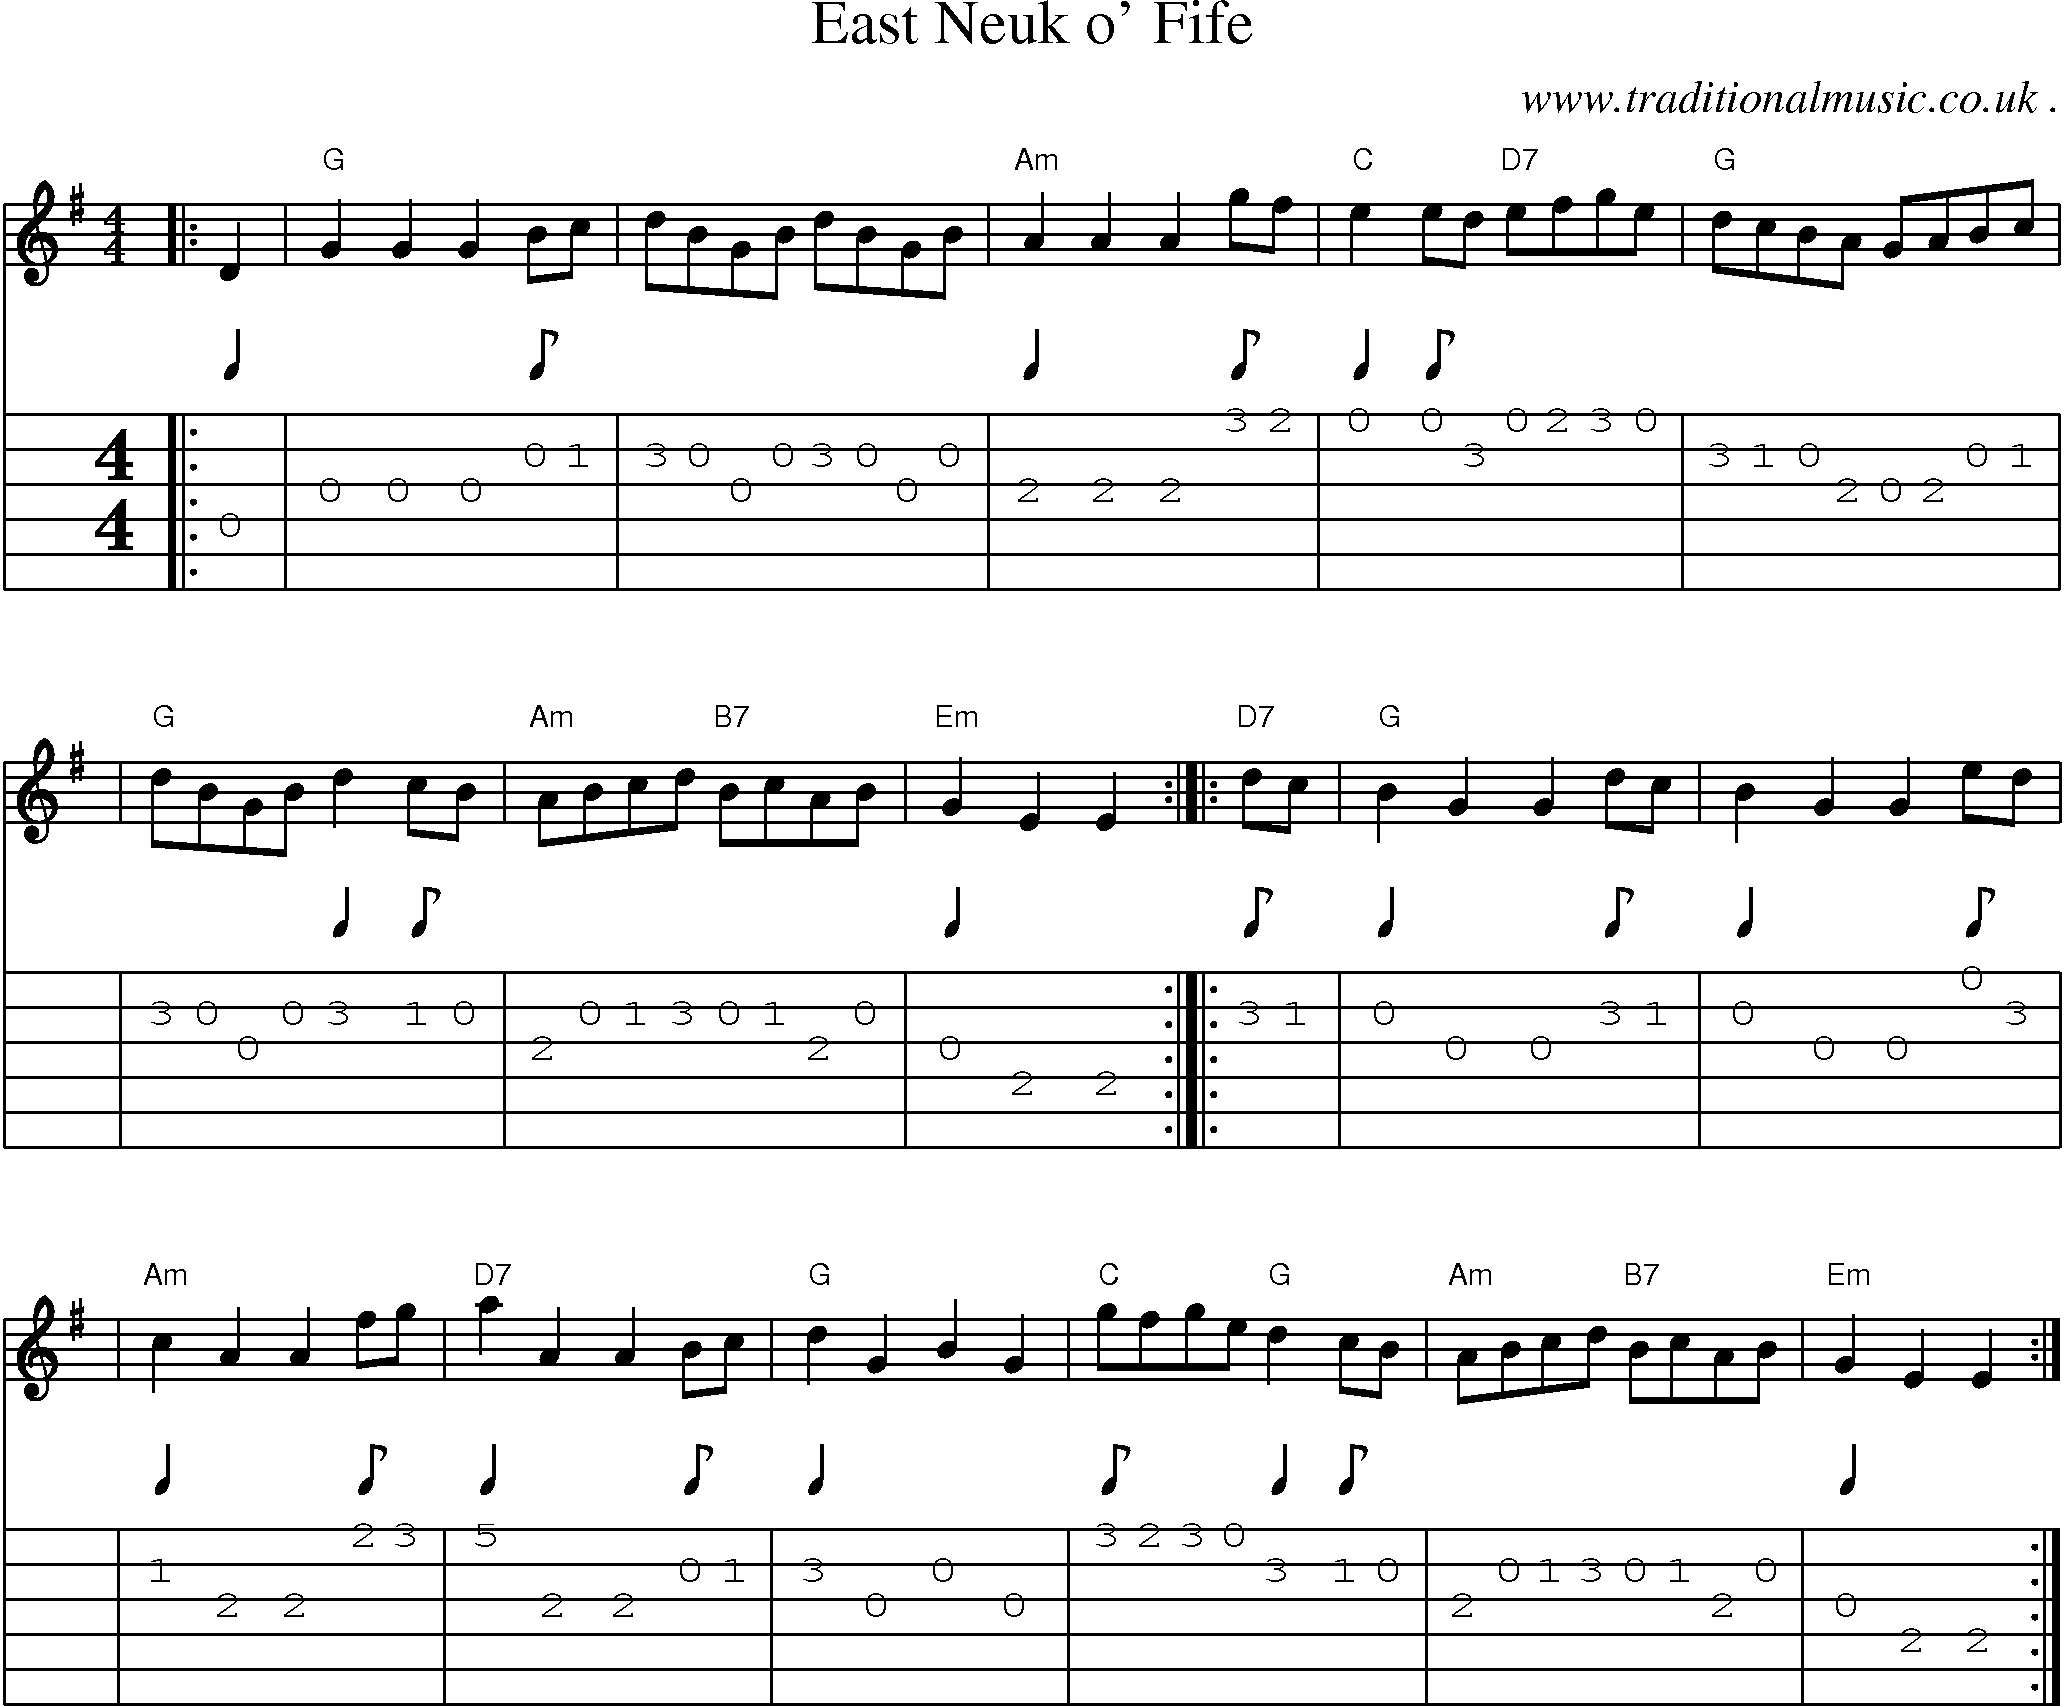 Sheet-music  score, Chords and Guitar Tabs for East Neuk O Fife